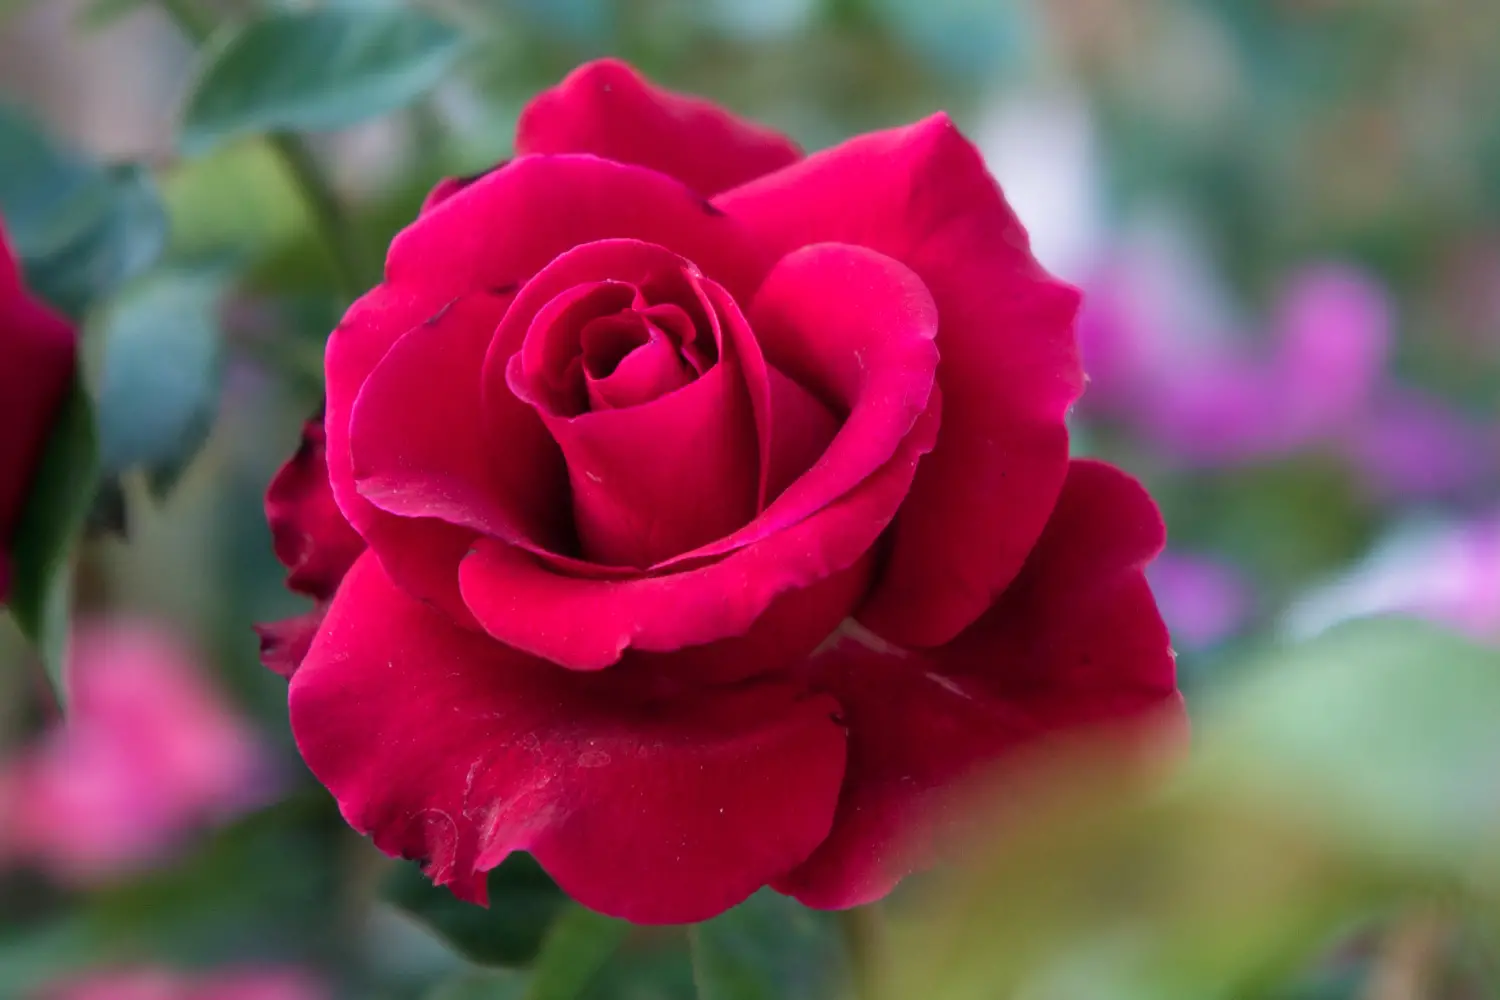 Cultural And Spiritual Meaning Of Pink Roses